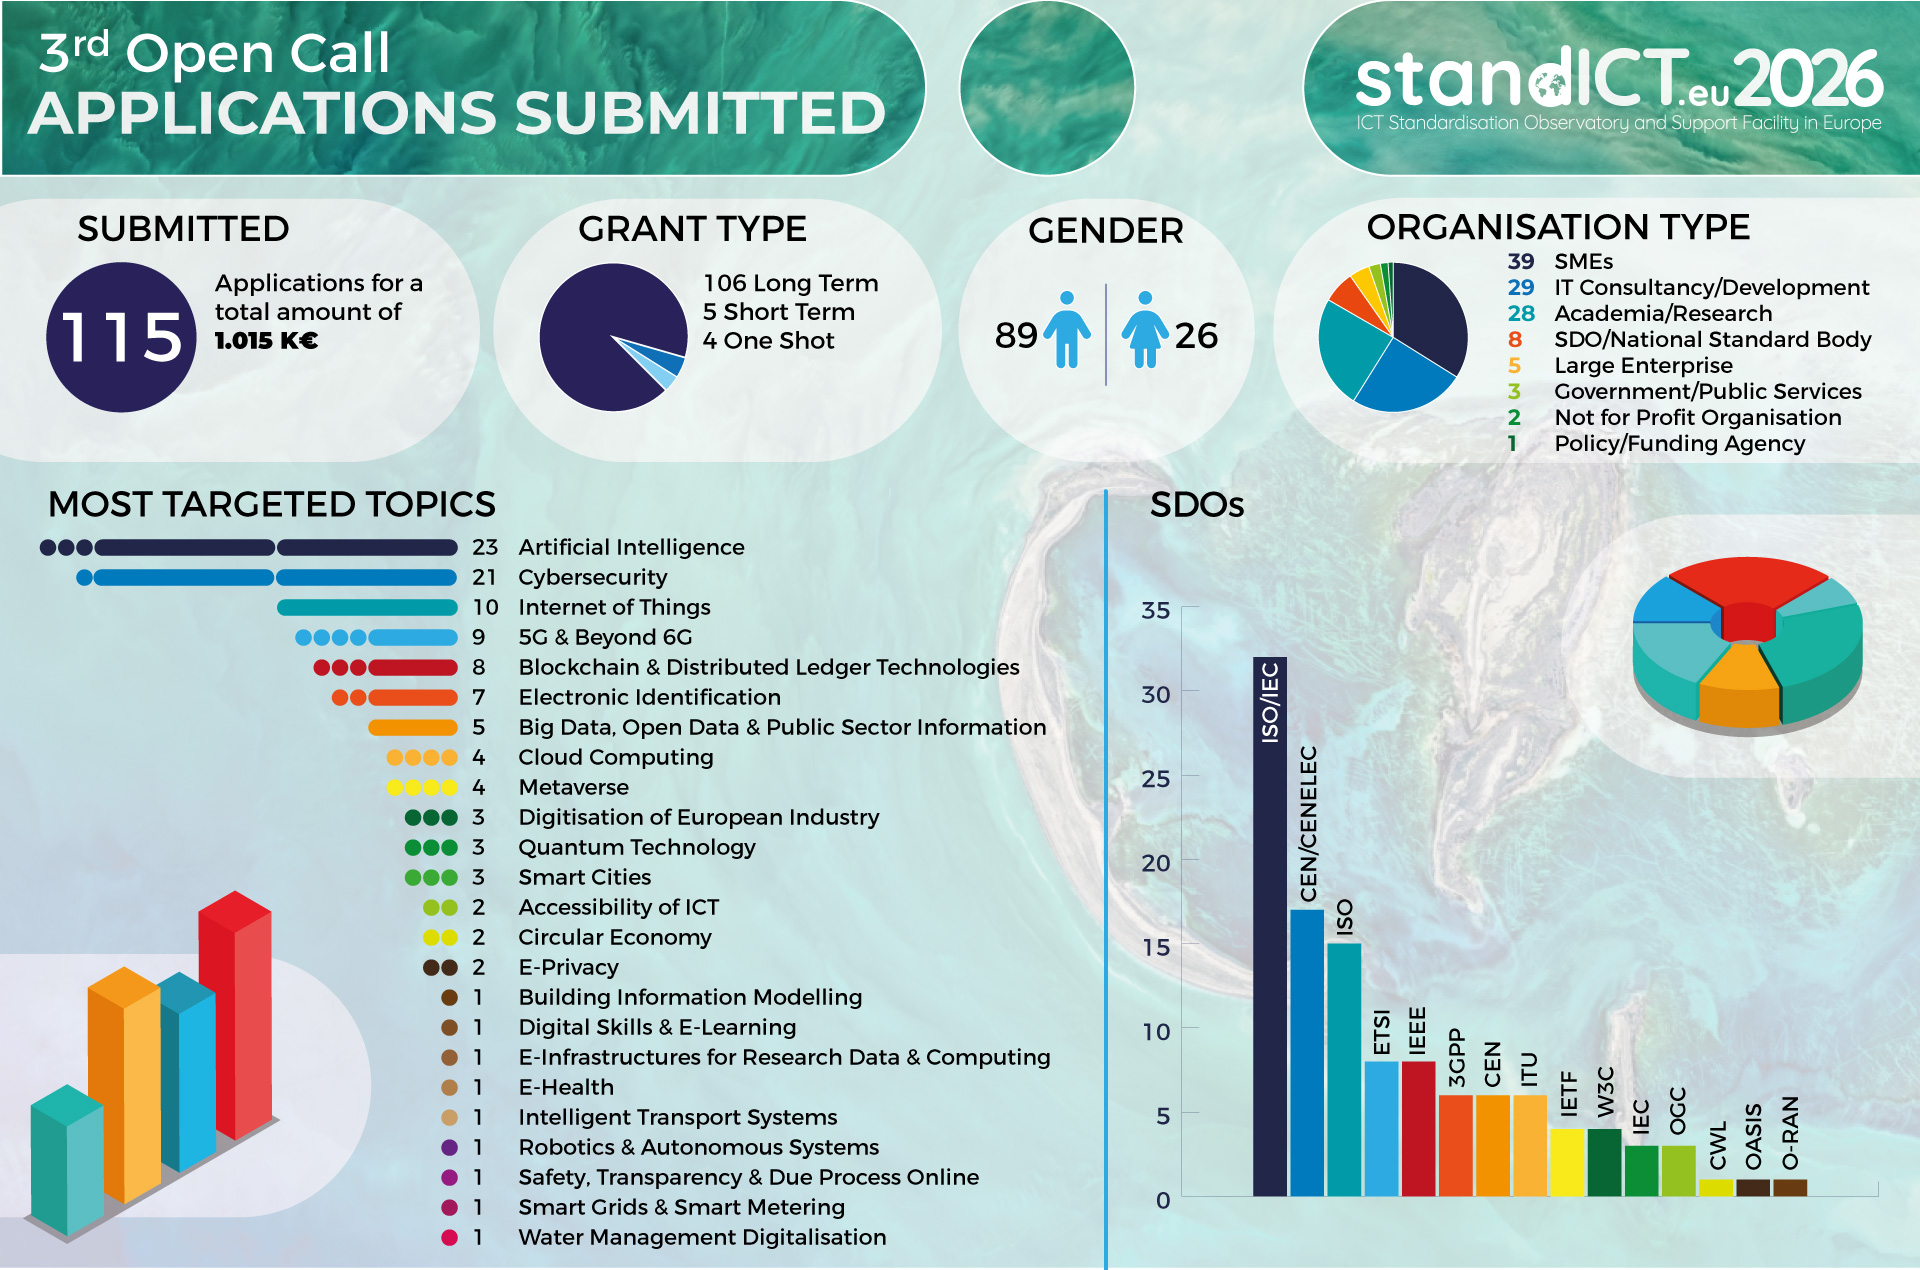 Statistics_Funded_OpenCall_3_2026